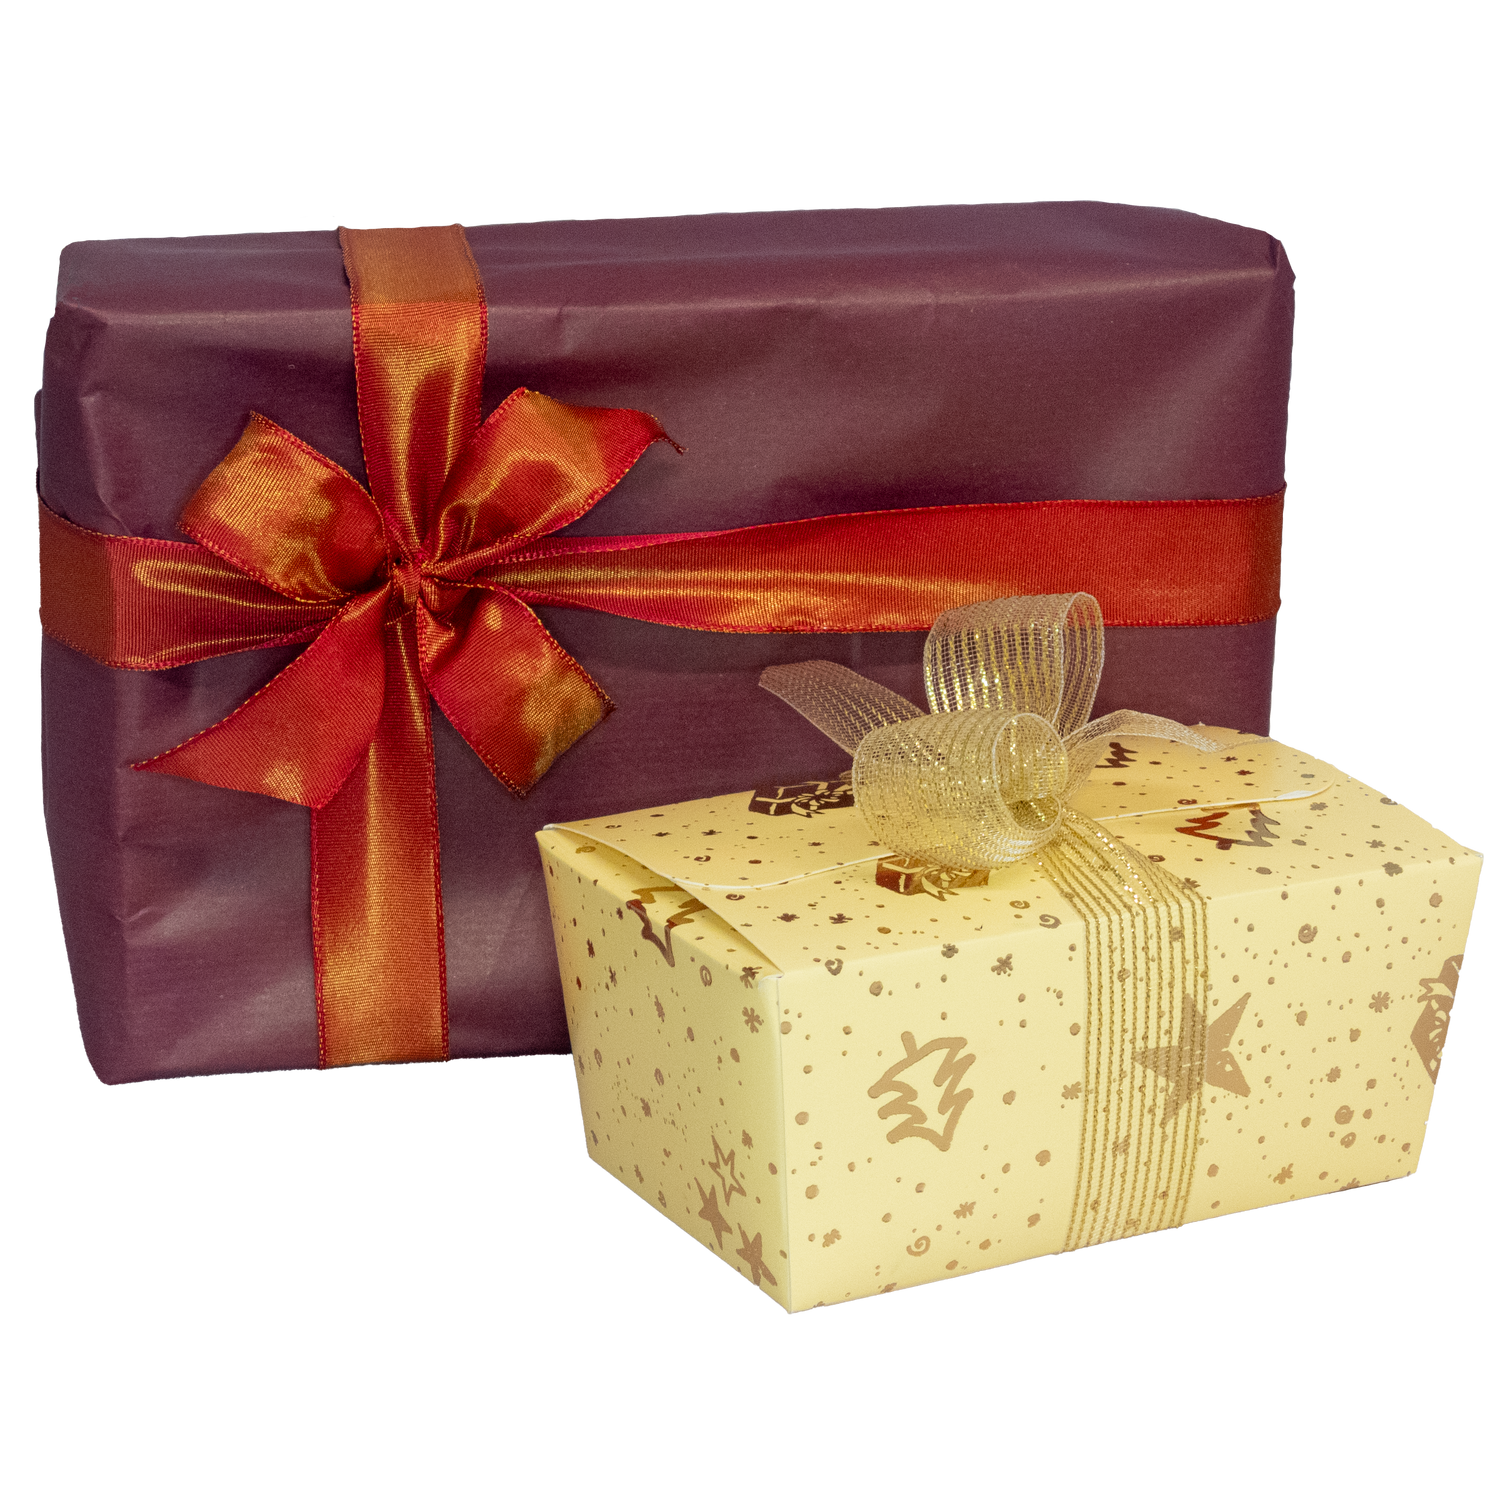 2 Gift wrapped boxes, one in red paper with orangey-red ribbon and one in gold with christmas symbols and gold ribbon